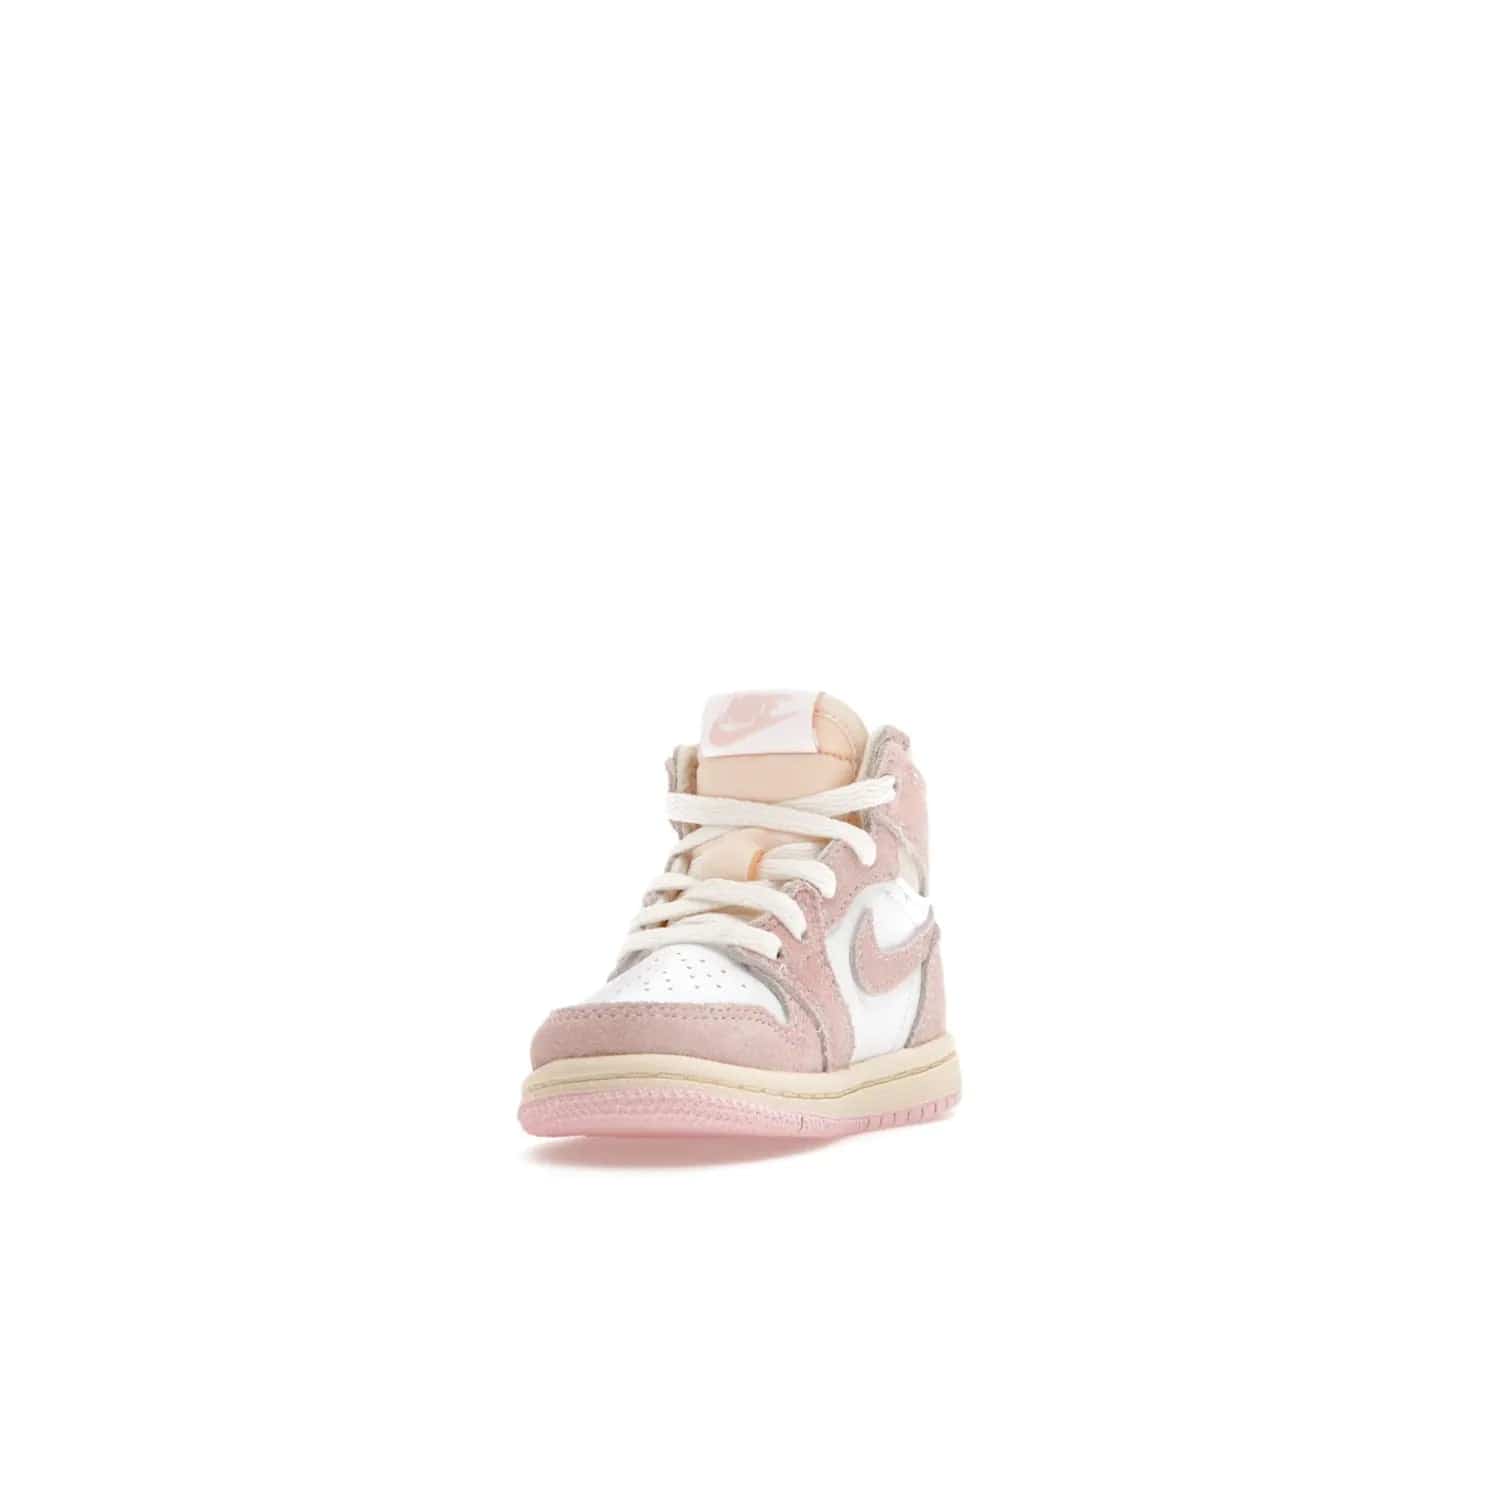 Jordan 1 Retro High OG Washed Pink (TD) - Image 13 - Only at www.BallersClubKickz.com - Retro style meets modern comfort: Introducing the Jordan 1 High OG Washed Pink (TD). Combining Atmosphere/White/Muslin/Sail colors with a high-rise silhouette, these shoes will be an instant classic when they release April 22, 2023.